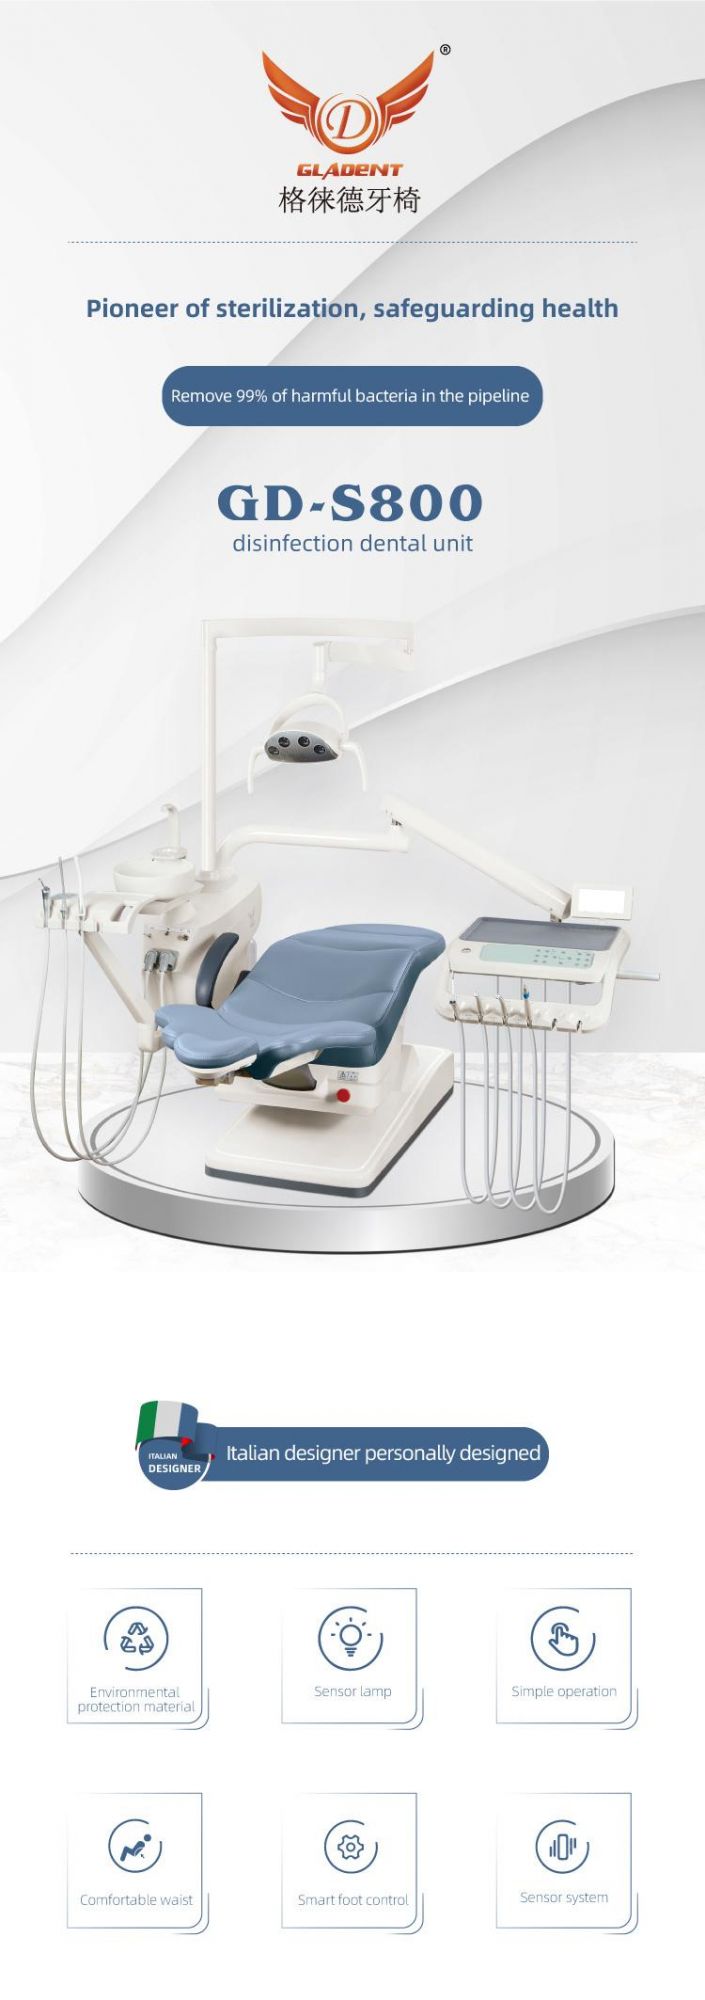 Best Price for Dental Unit Used Dental Equipment with Disinfection System